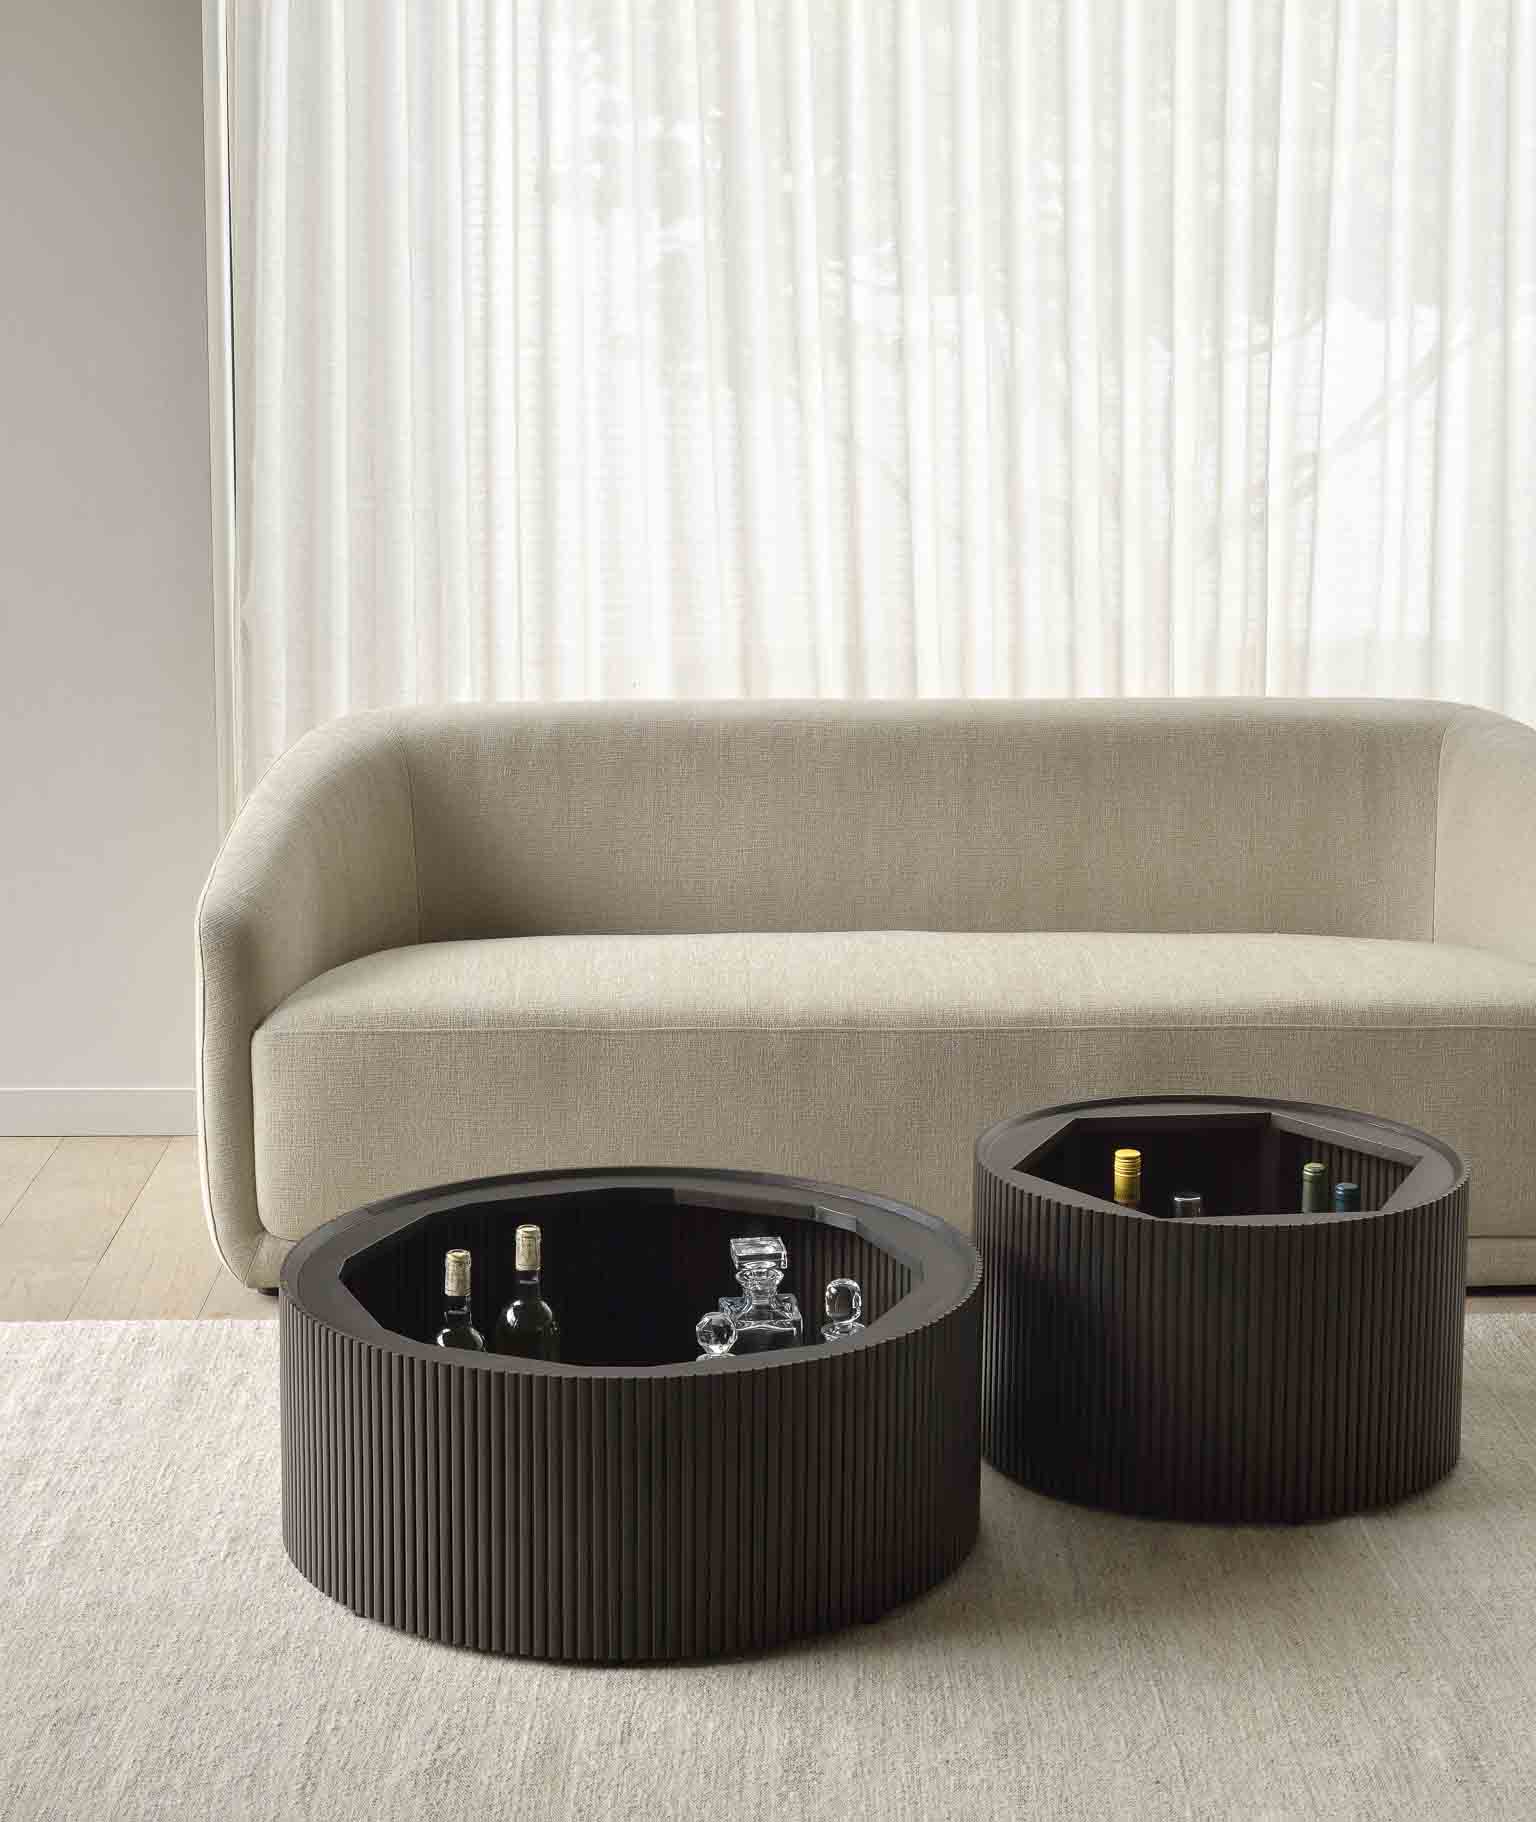 Roller Max Coffee Table - More Options